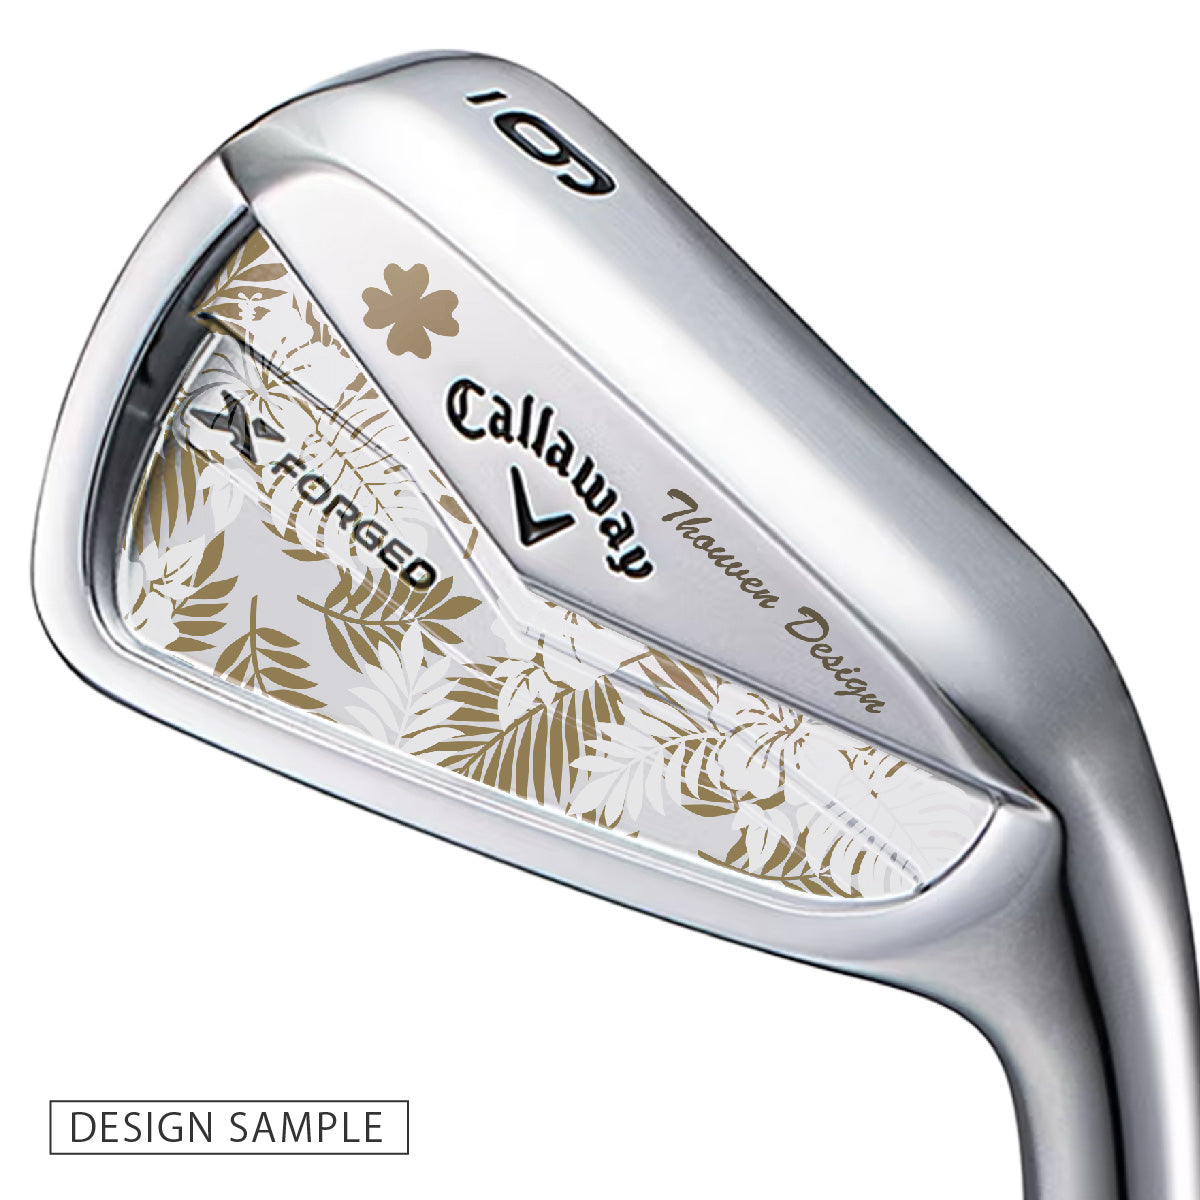 Callaway /X FORGED（6本セット） / カスタムデザイン